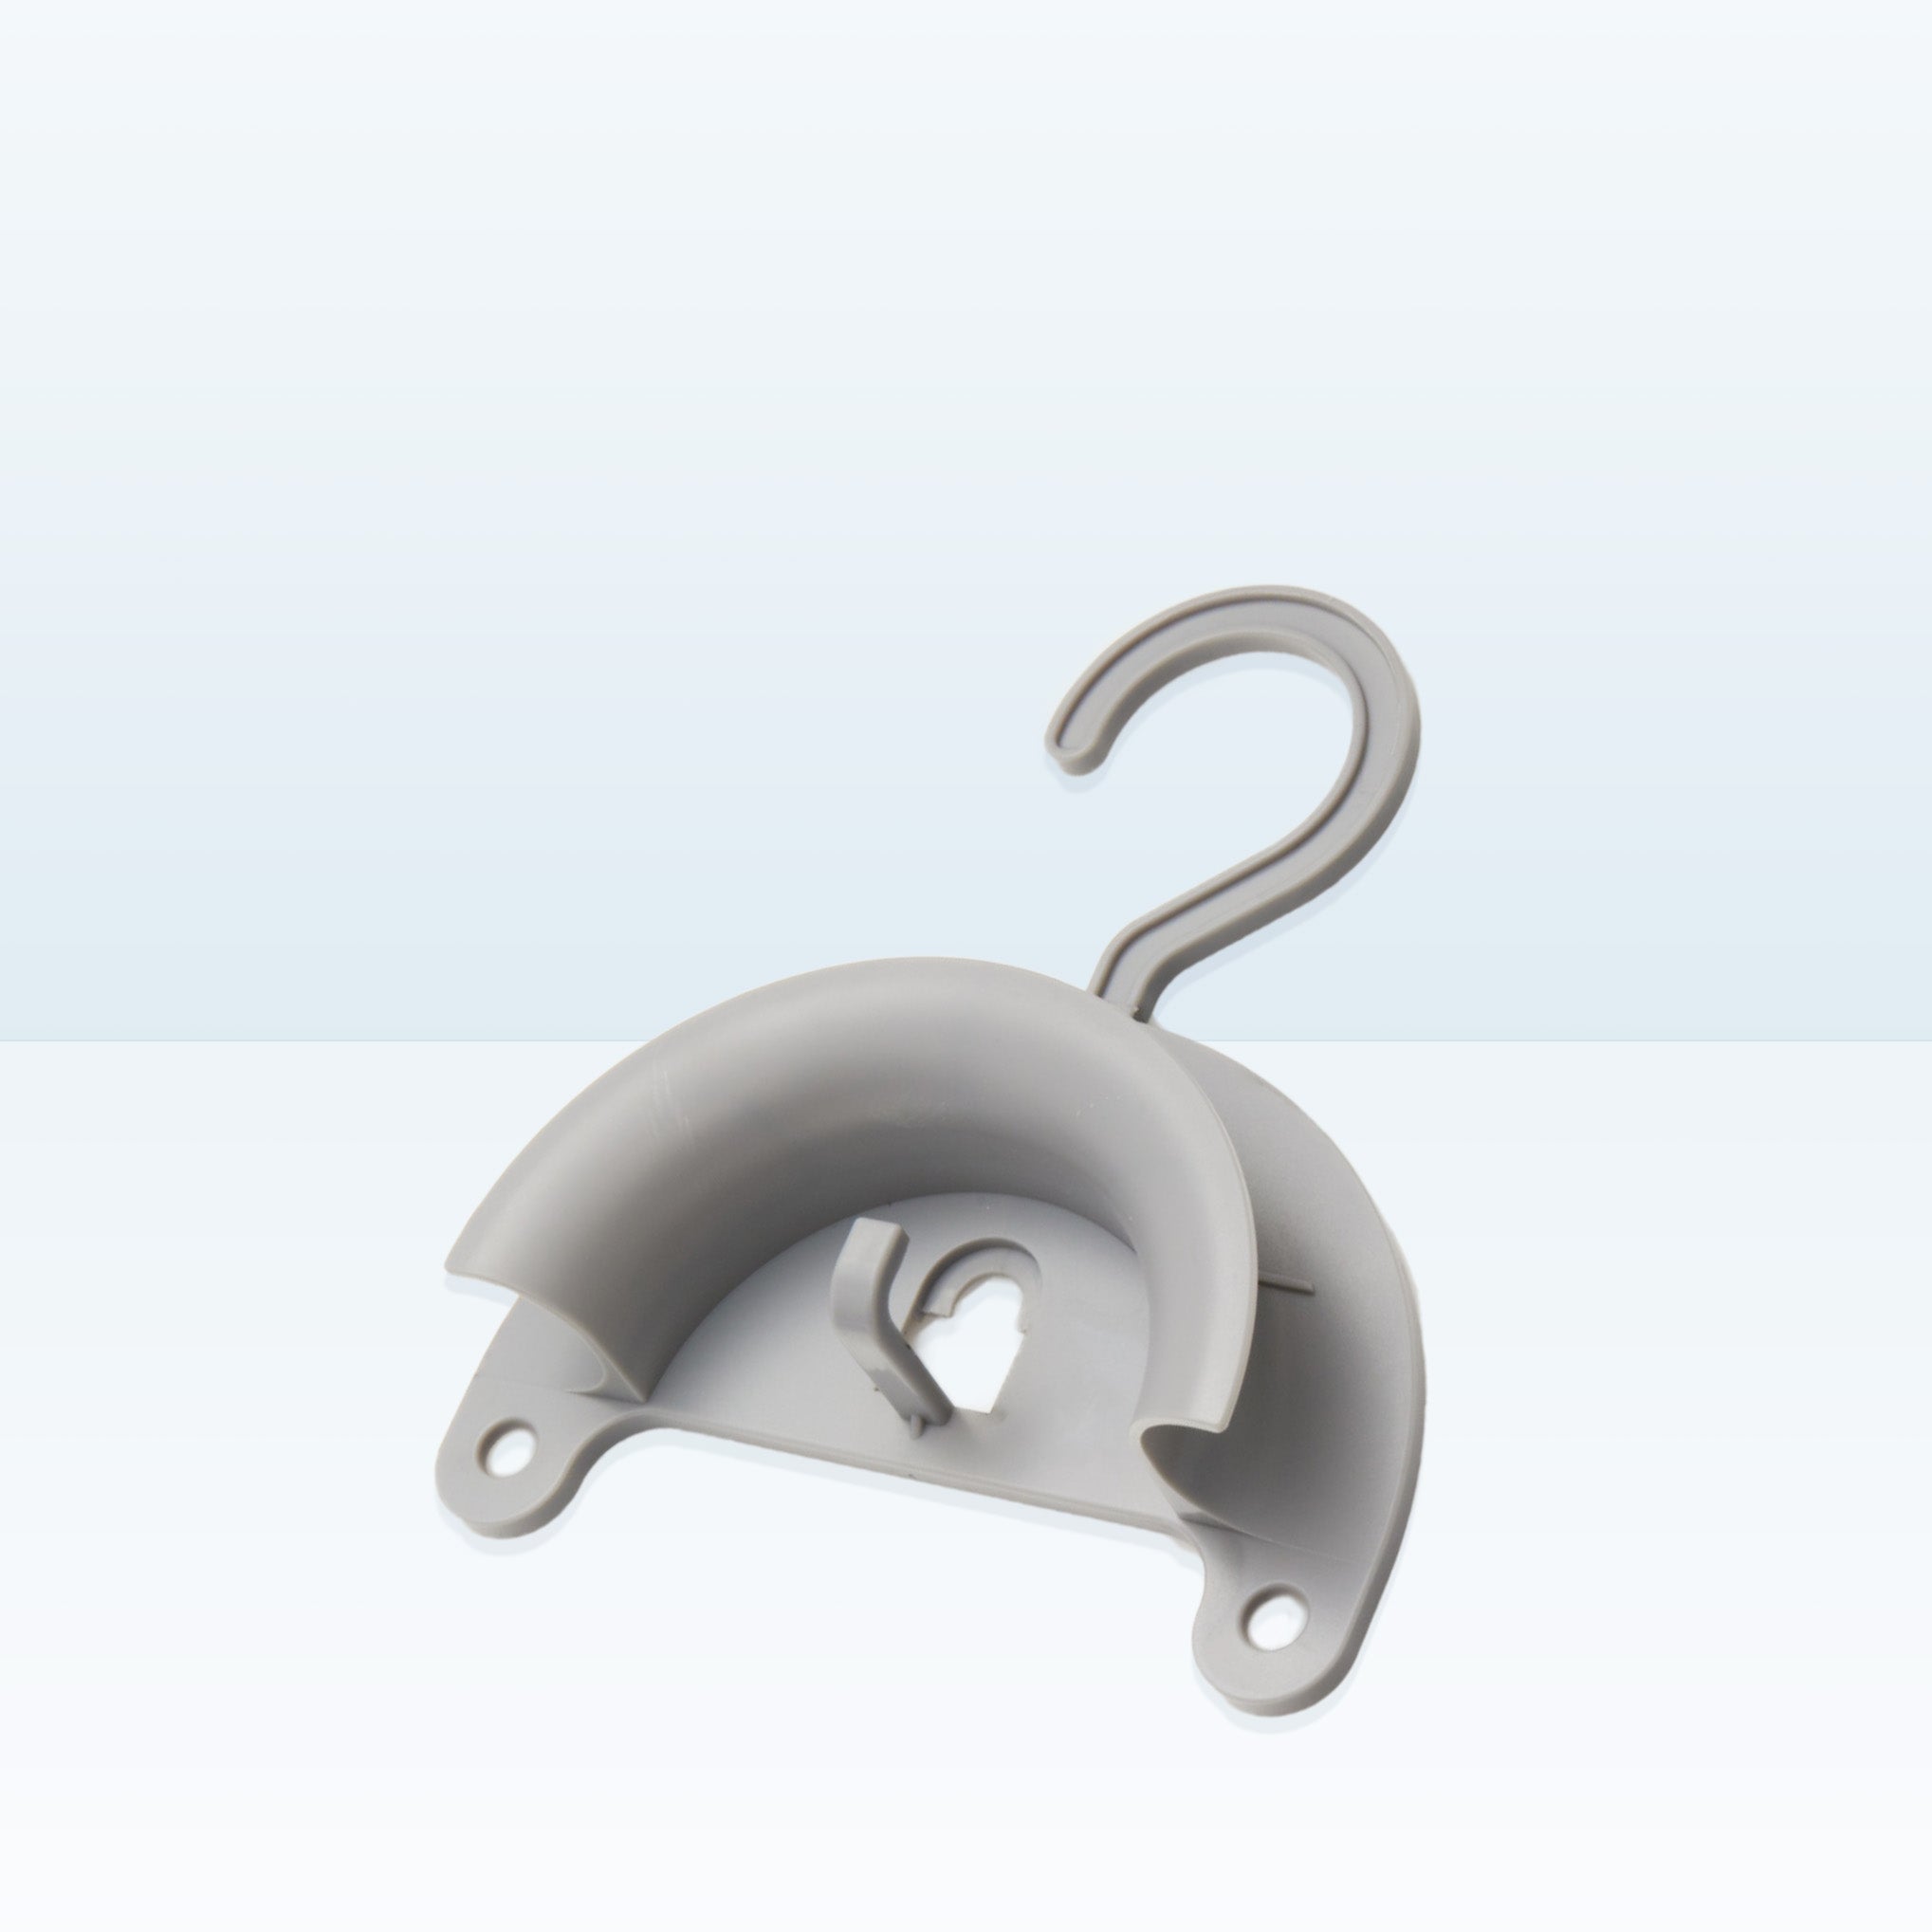 CPAP Cleaning Hanger